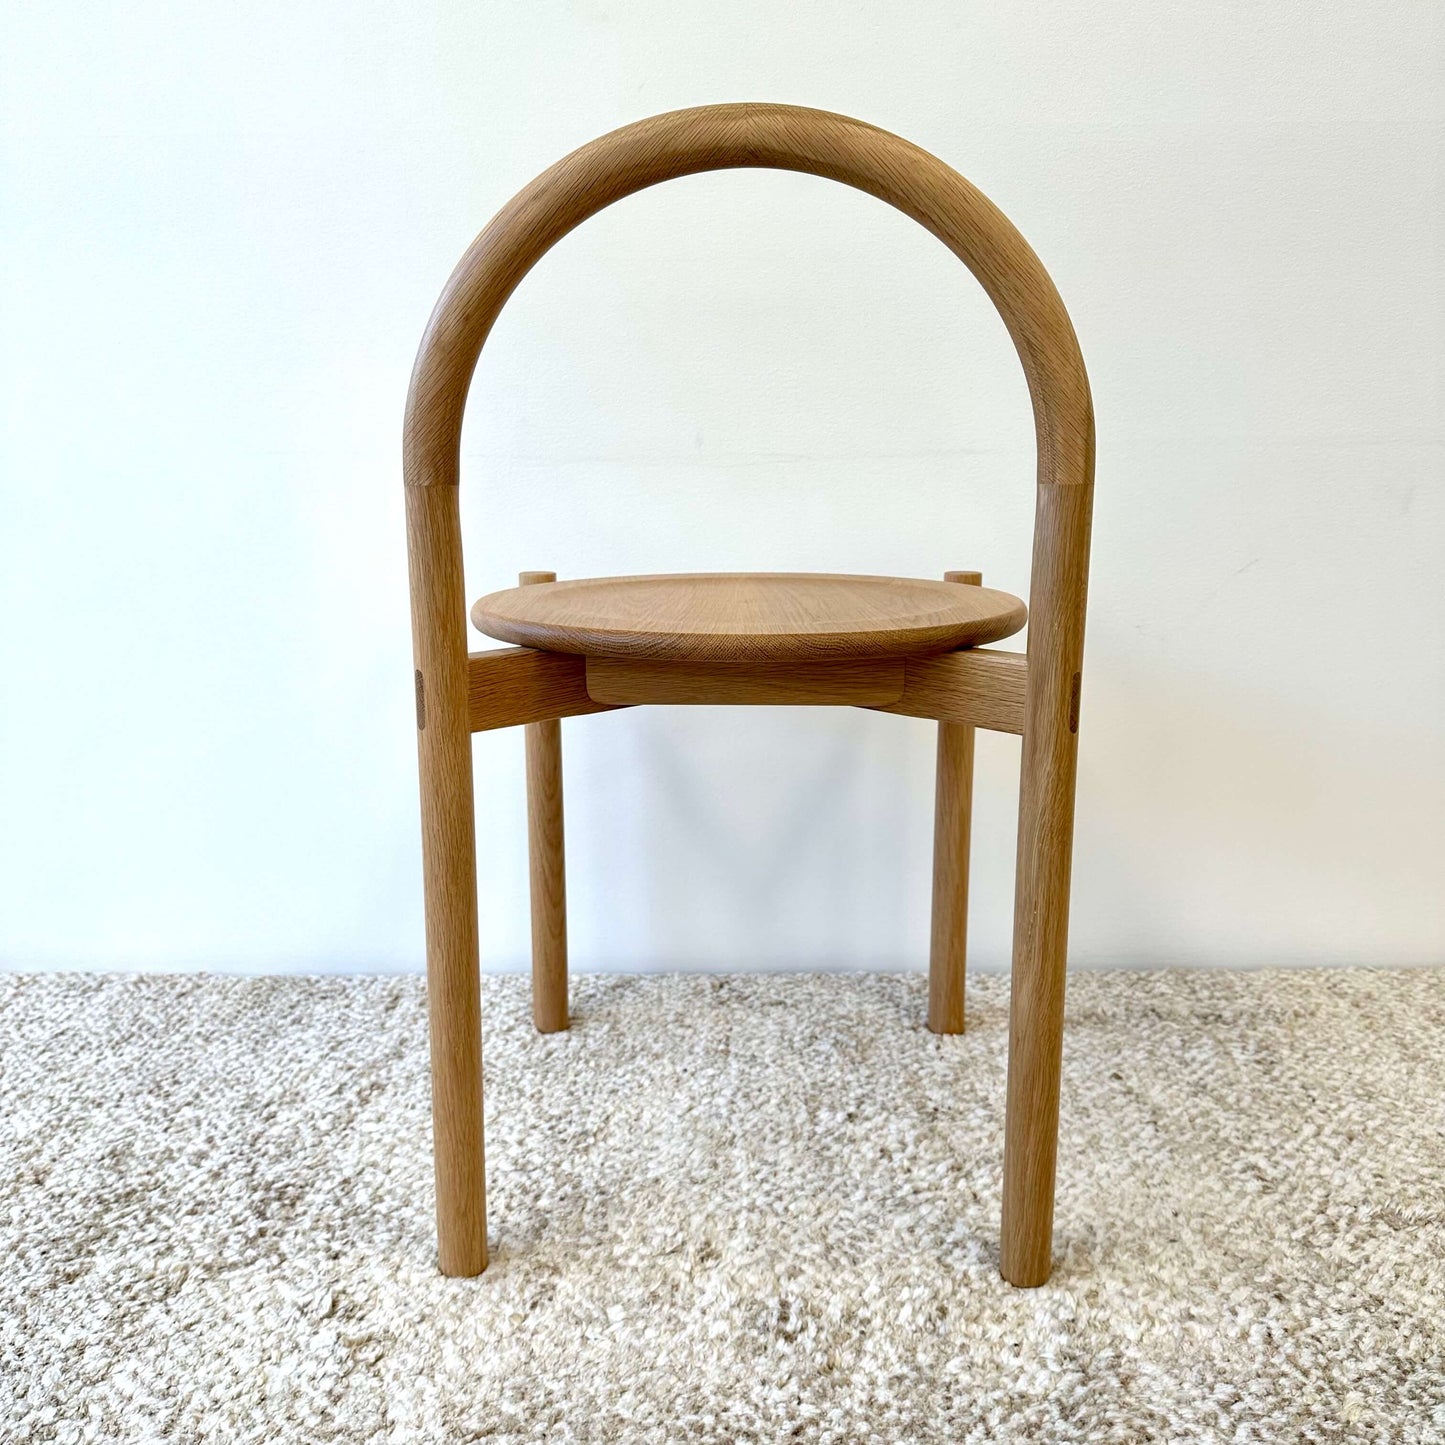 Halo Chair, SBW